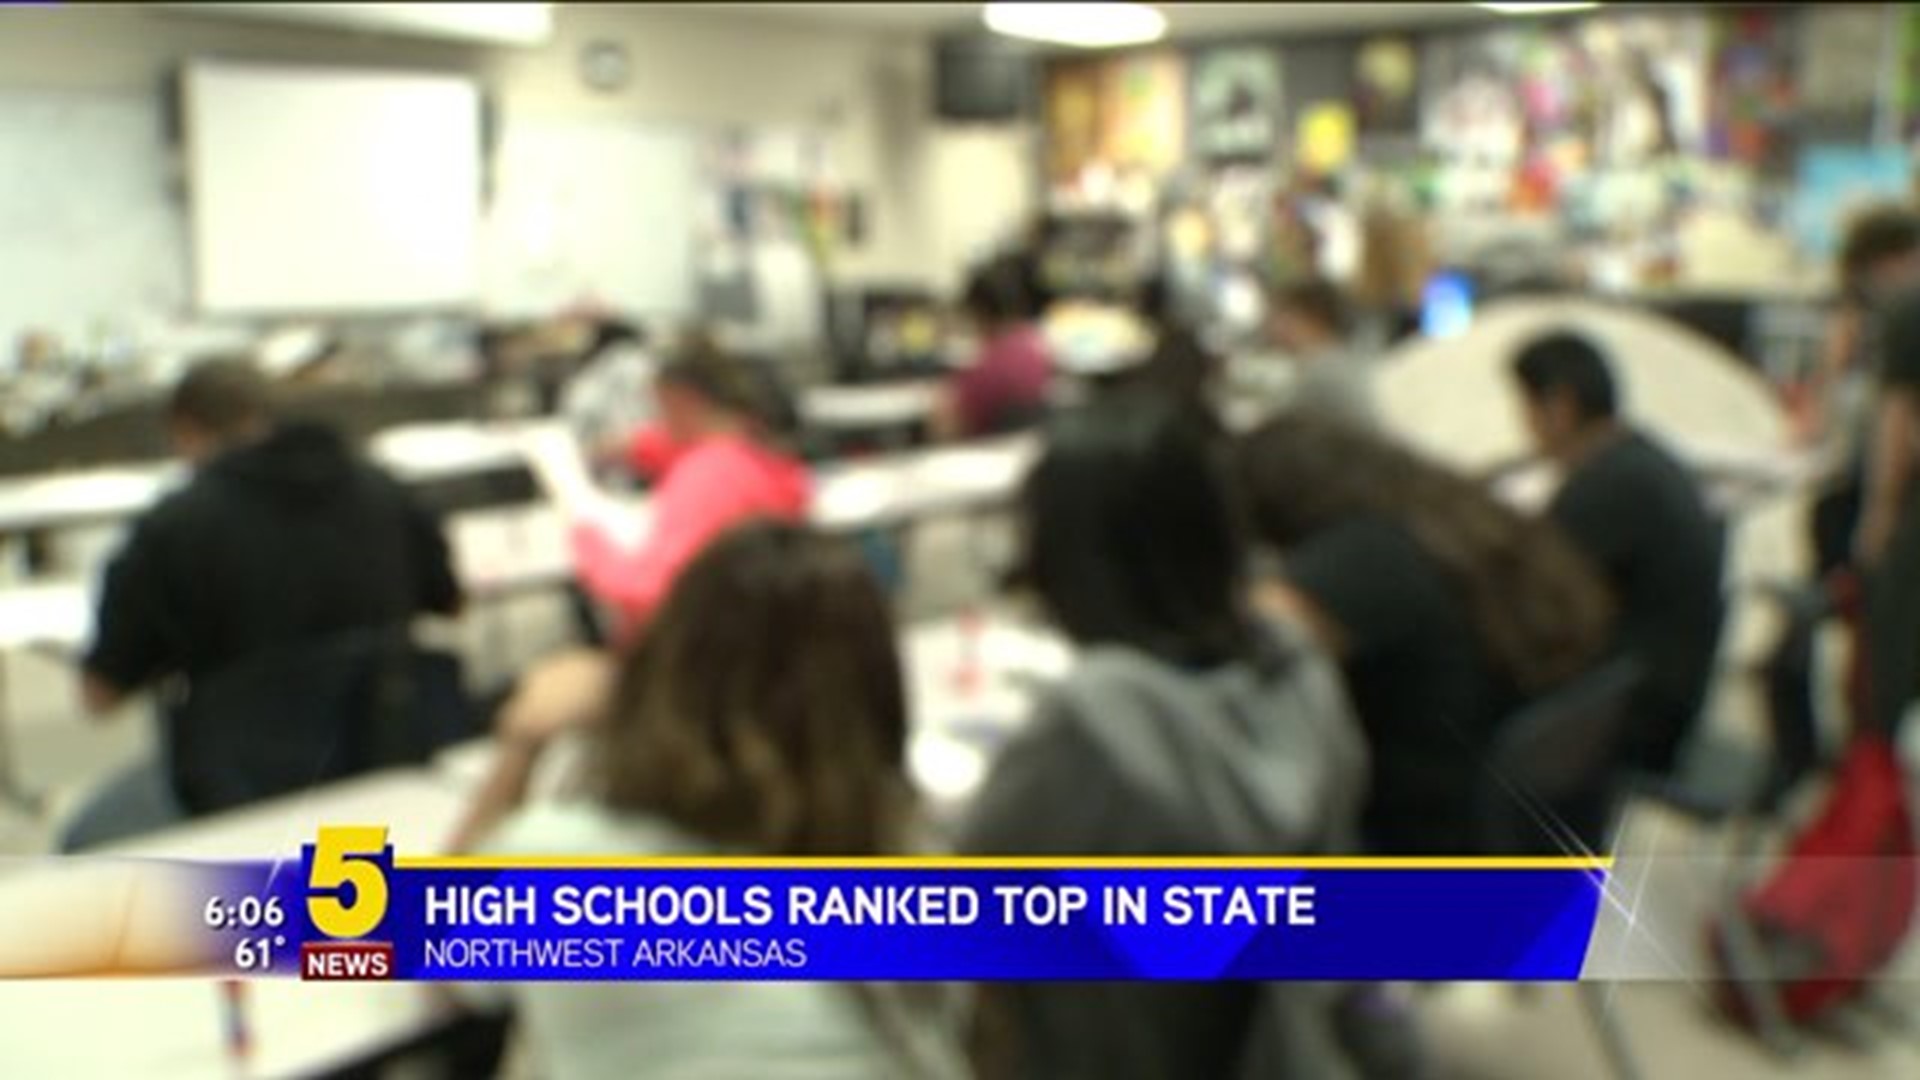 Several Northwest Arkansas High Schools Ranked Top In The State